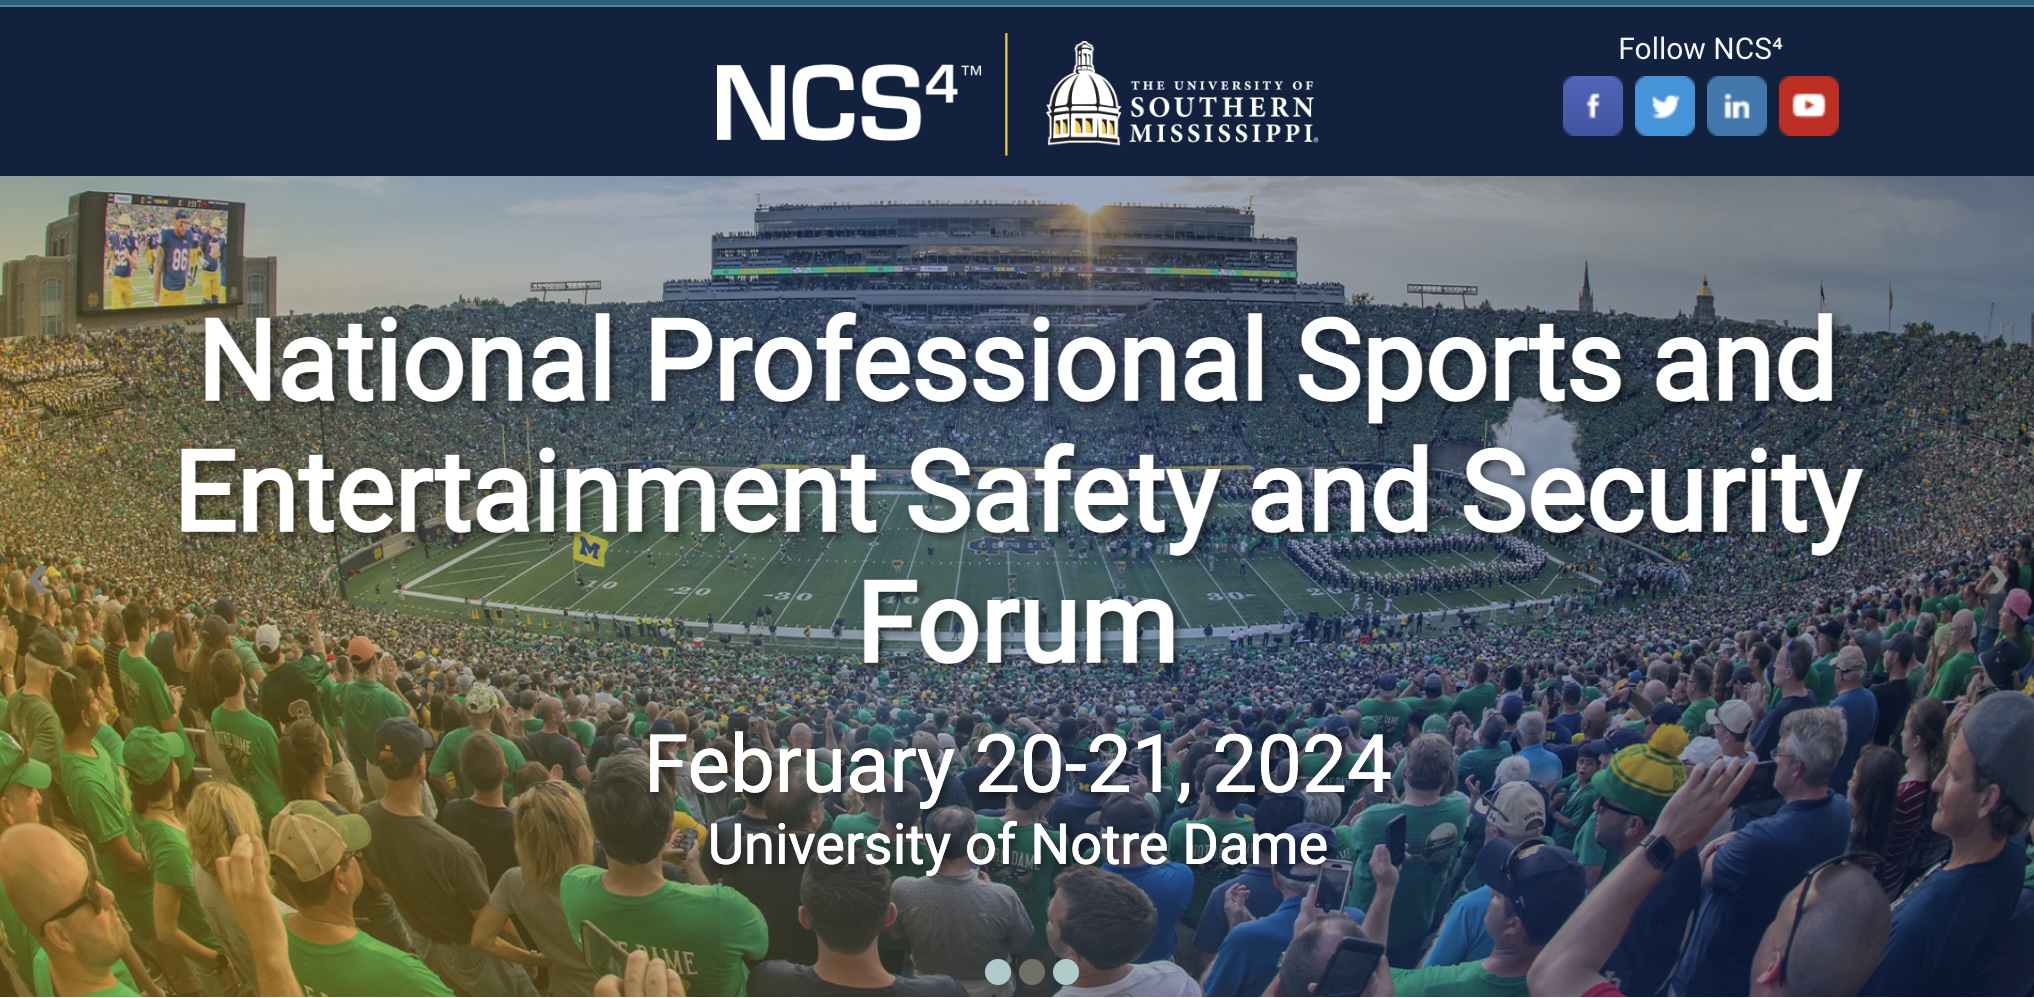 National Professional Sports and Entertainment Safety and Security Forum